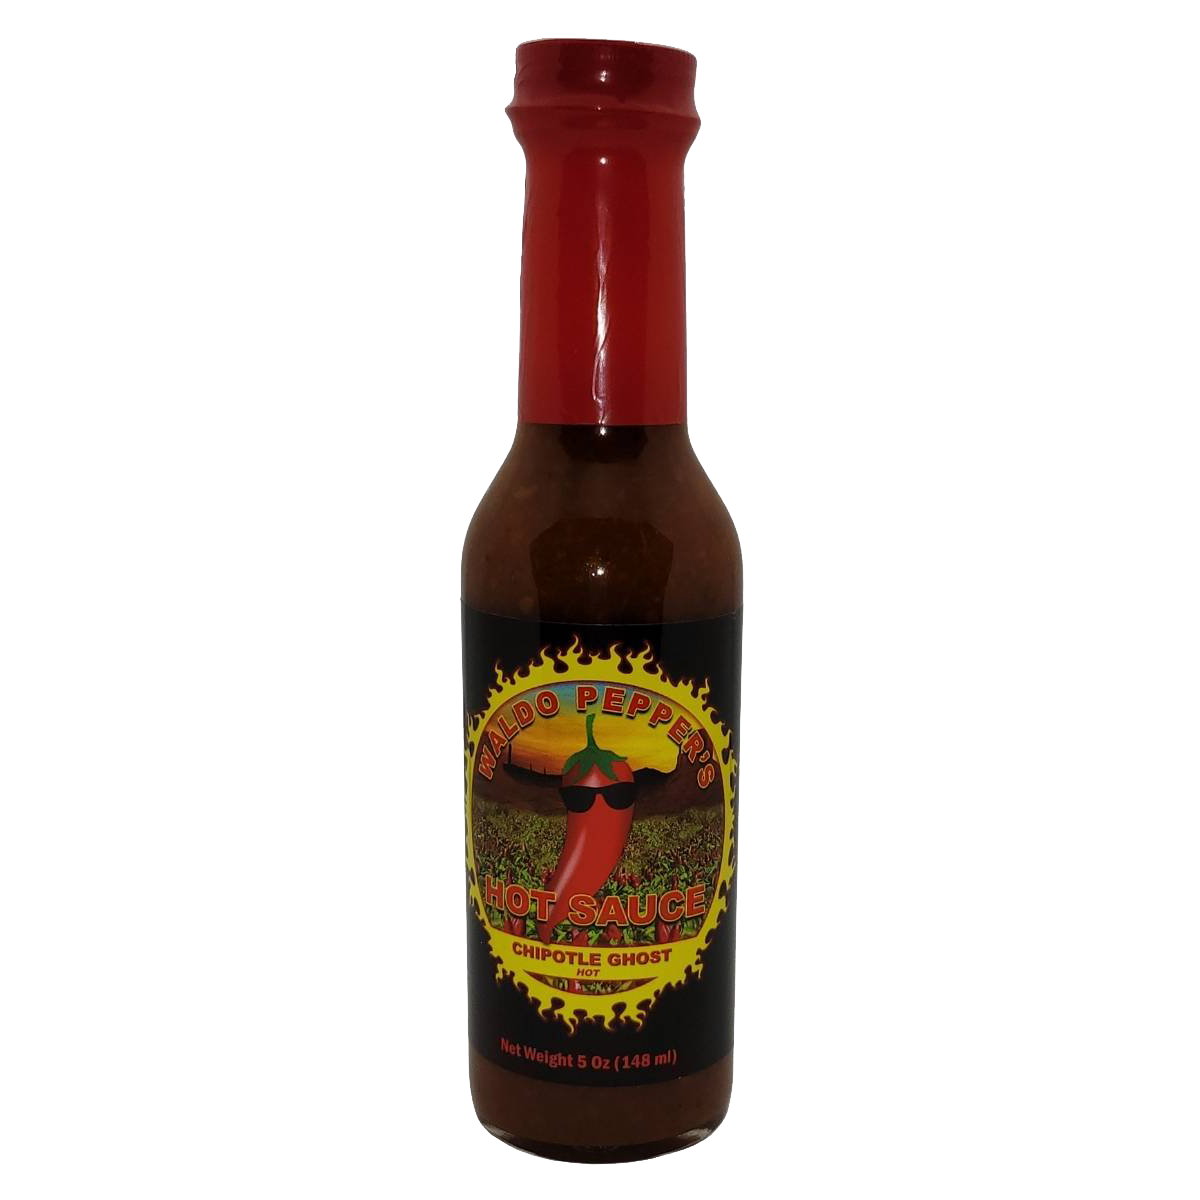 Waldo Peppers Hot Sauce - Chipotle Ghost